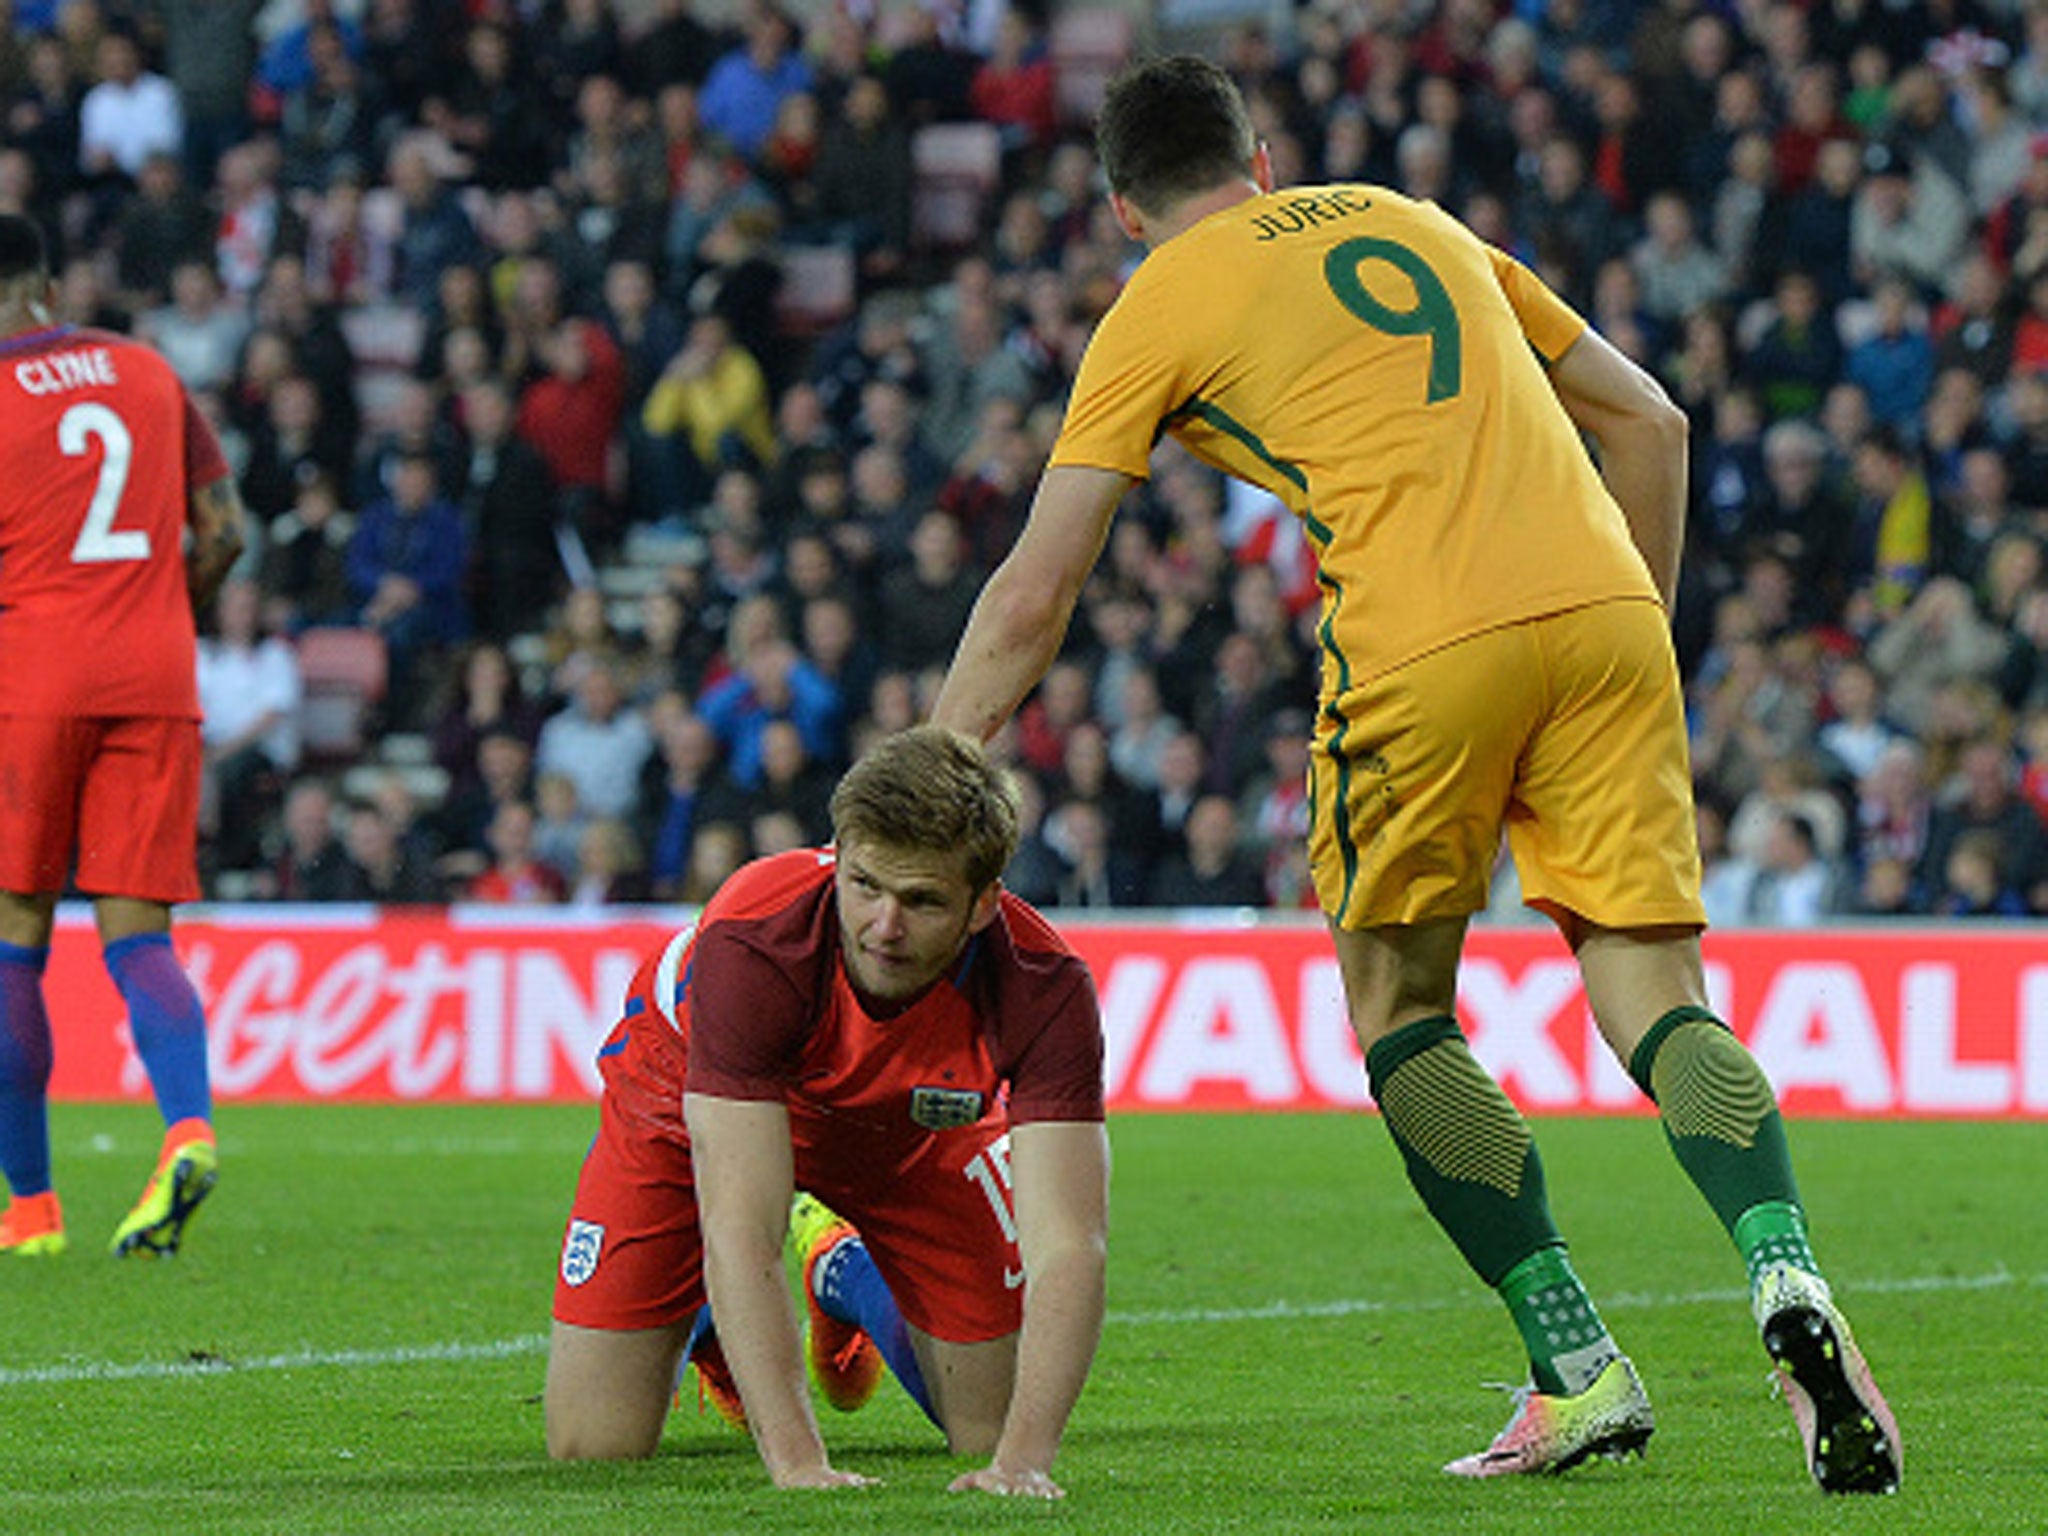 Tottenham's Eric Dier came off the bench to score an own goal for Australia in the closing minutes (Getty)